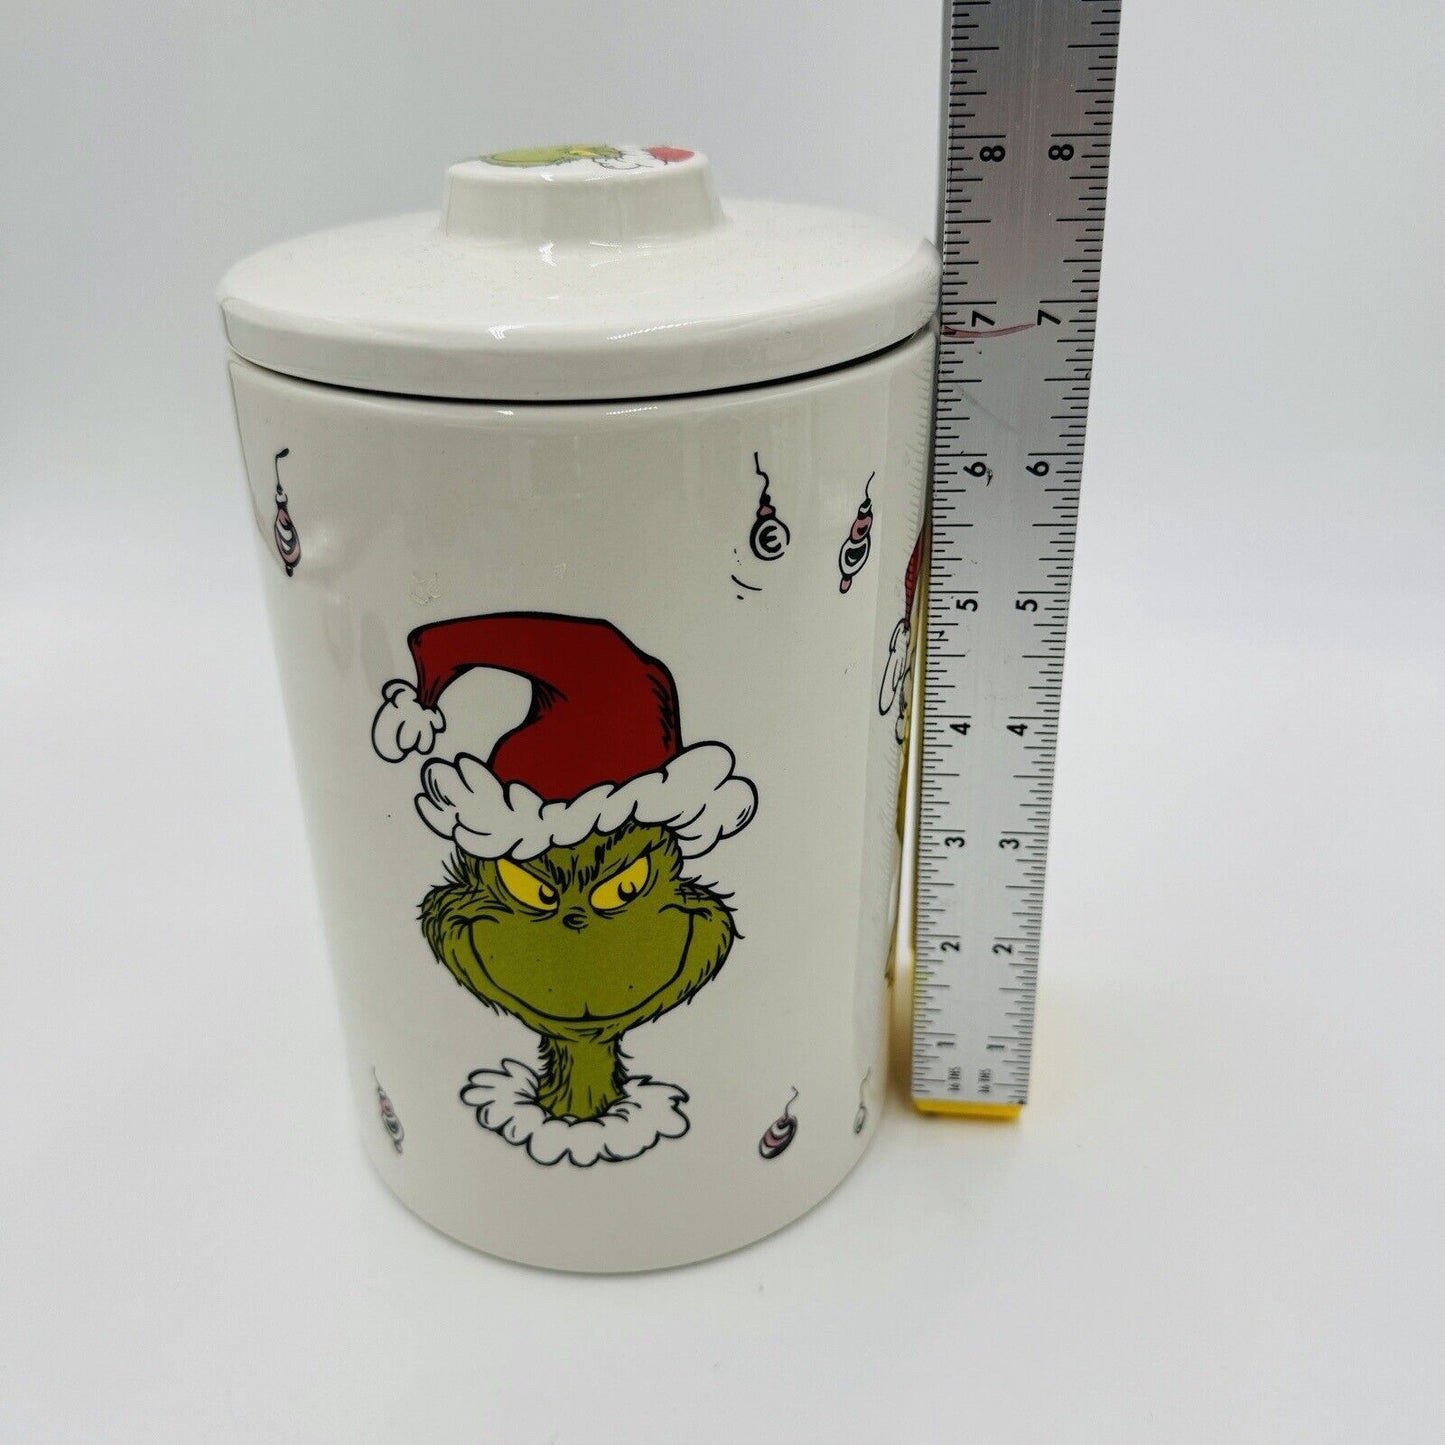 The Grinch Dr Seuss Christmas Cookie Jar Canister Ceramic Multi-faces